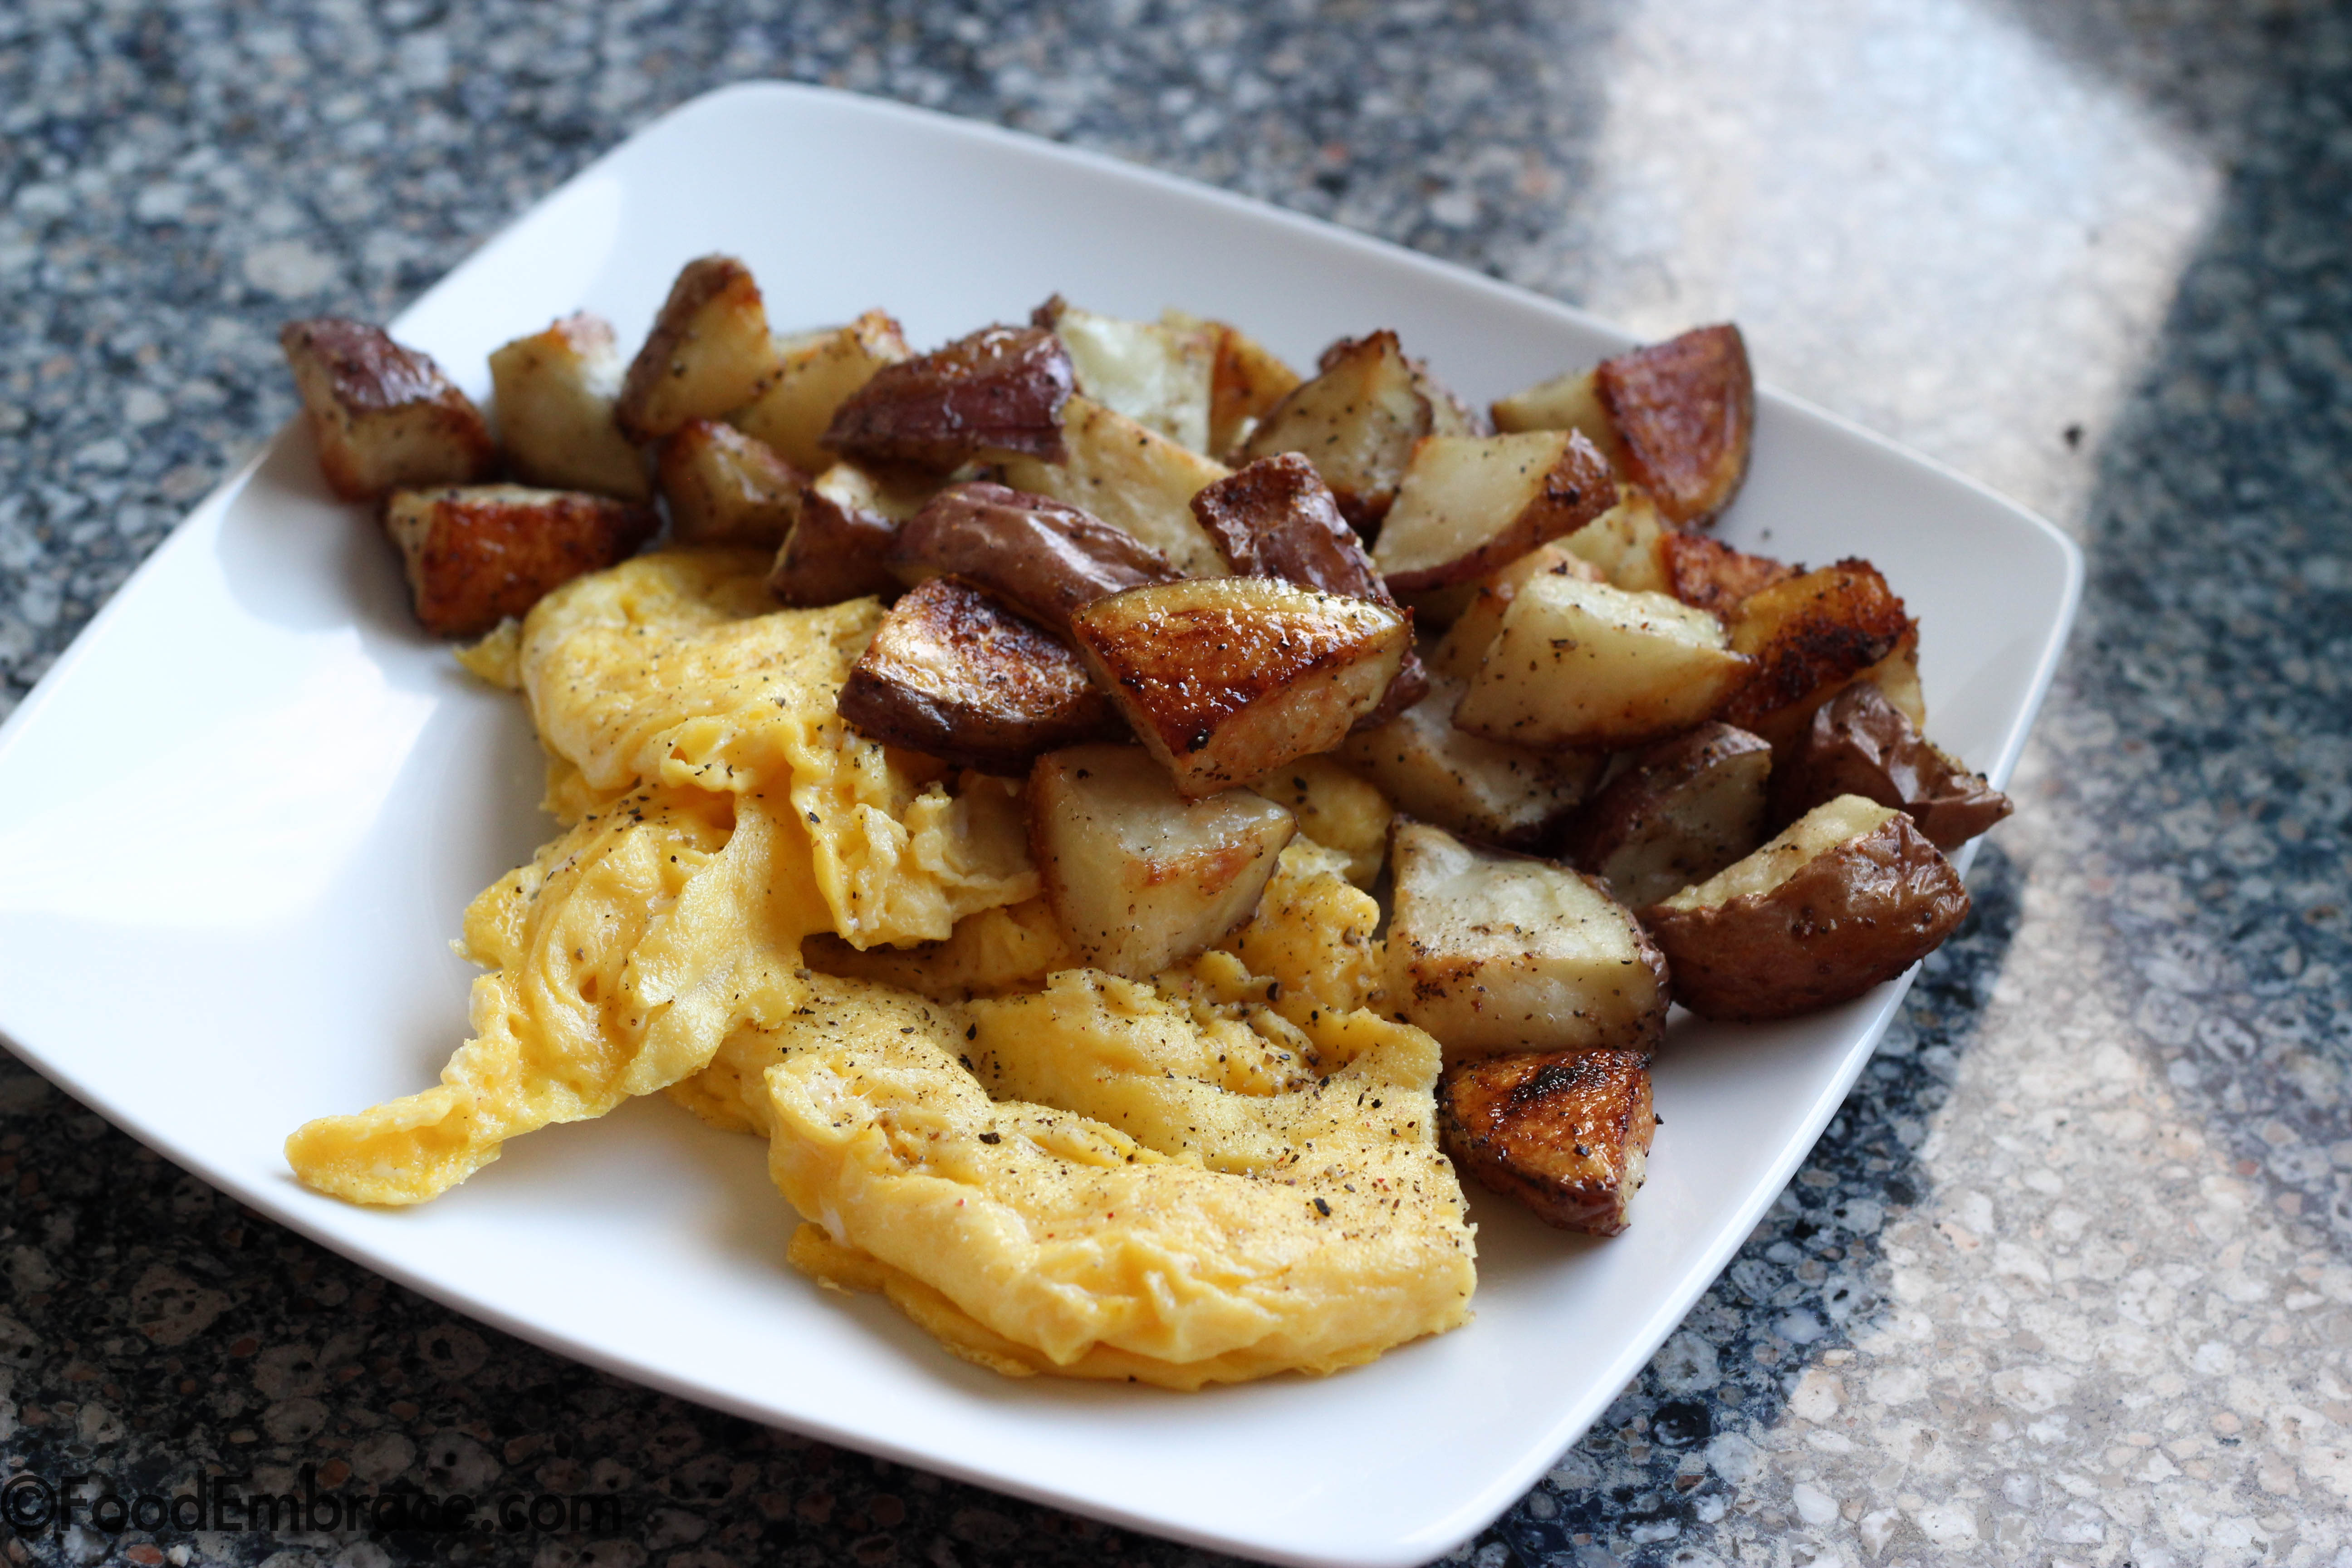 Eggs and roasted potatoes